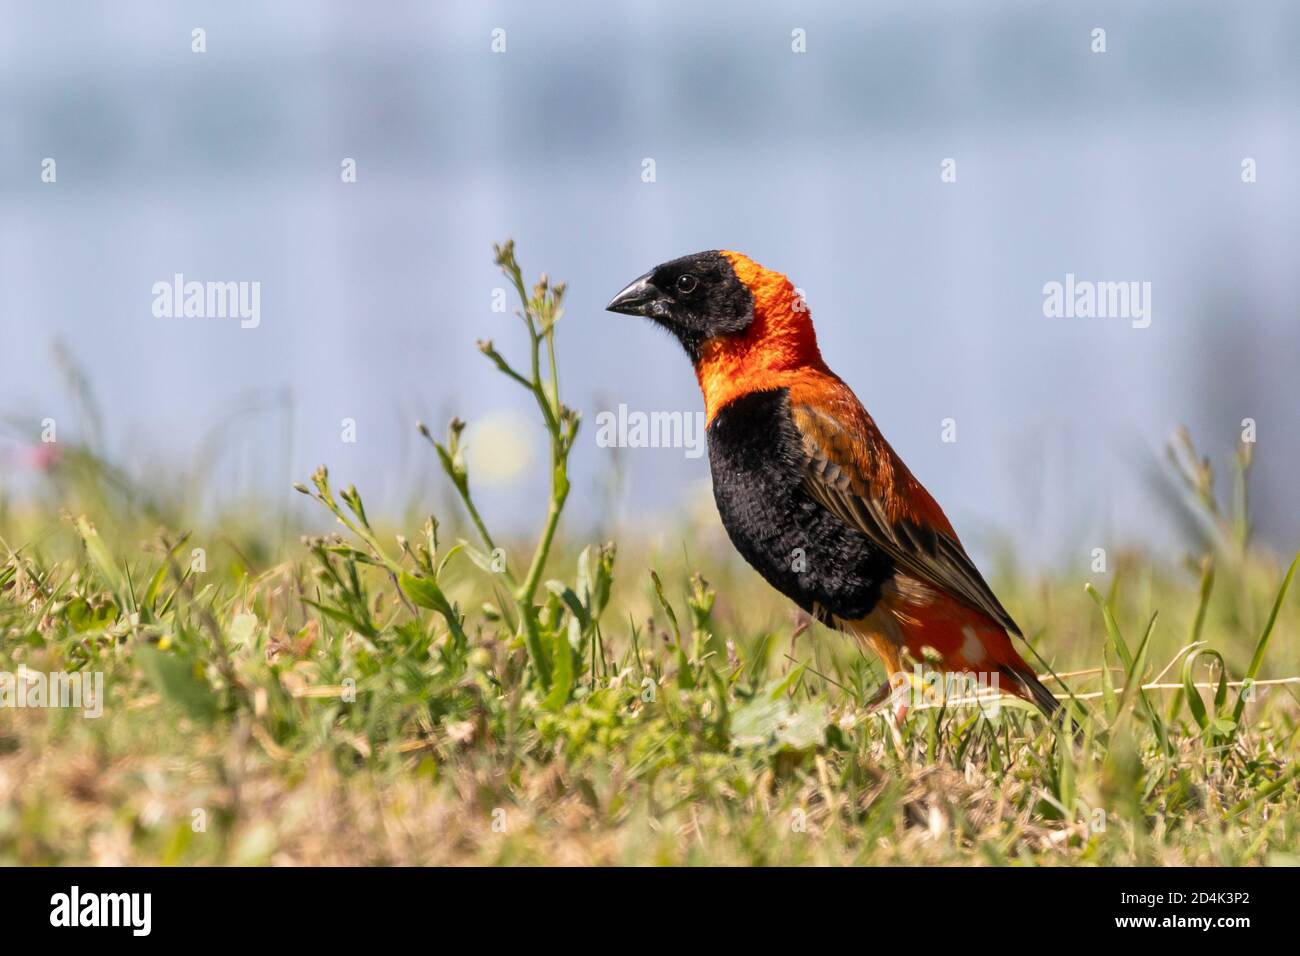 Southern Red Bishop (Euplectes orix) breeding male low angle on grass, Western Cape, South Africa Stock Photo